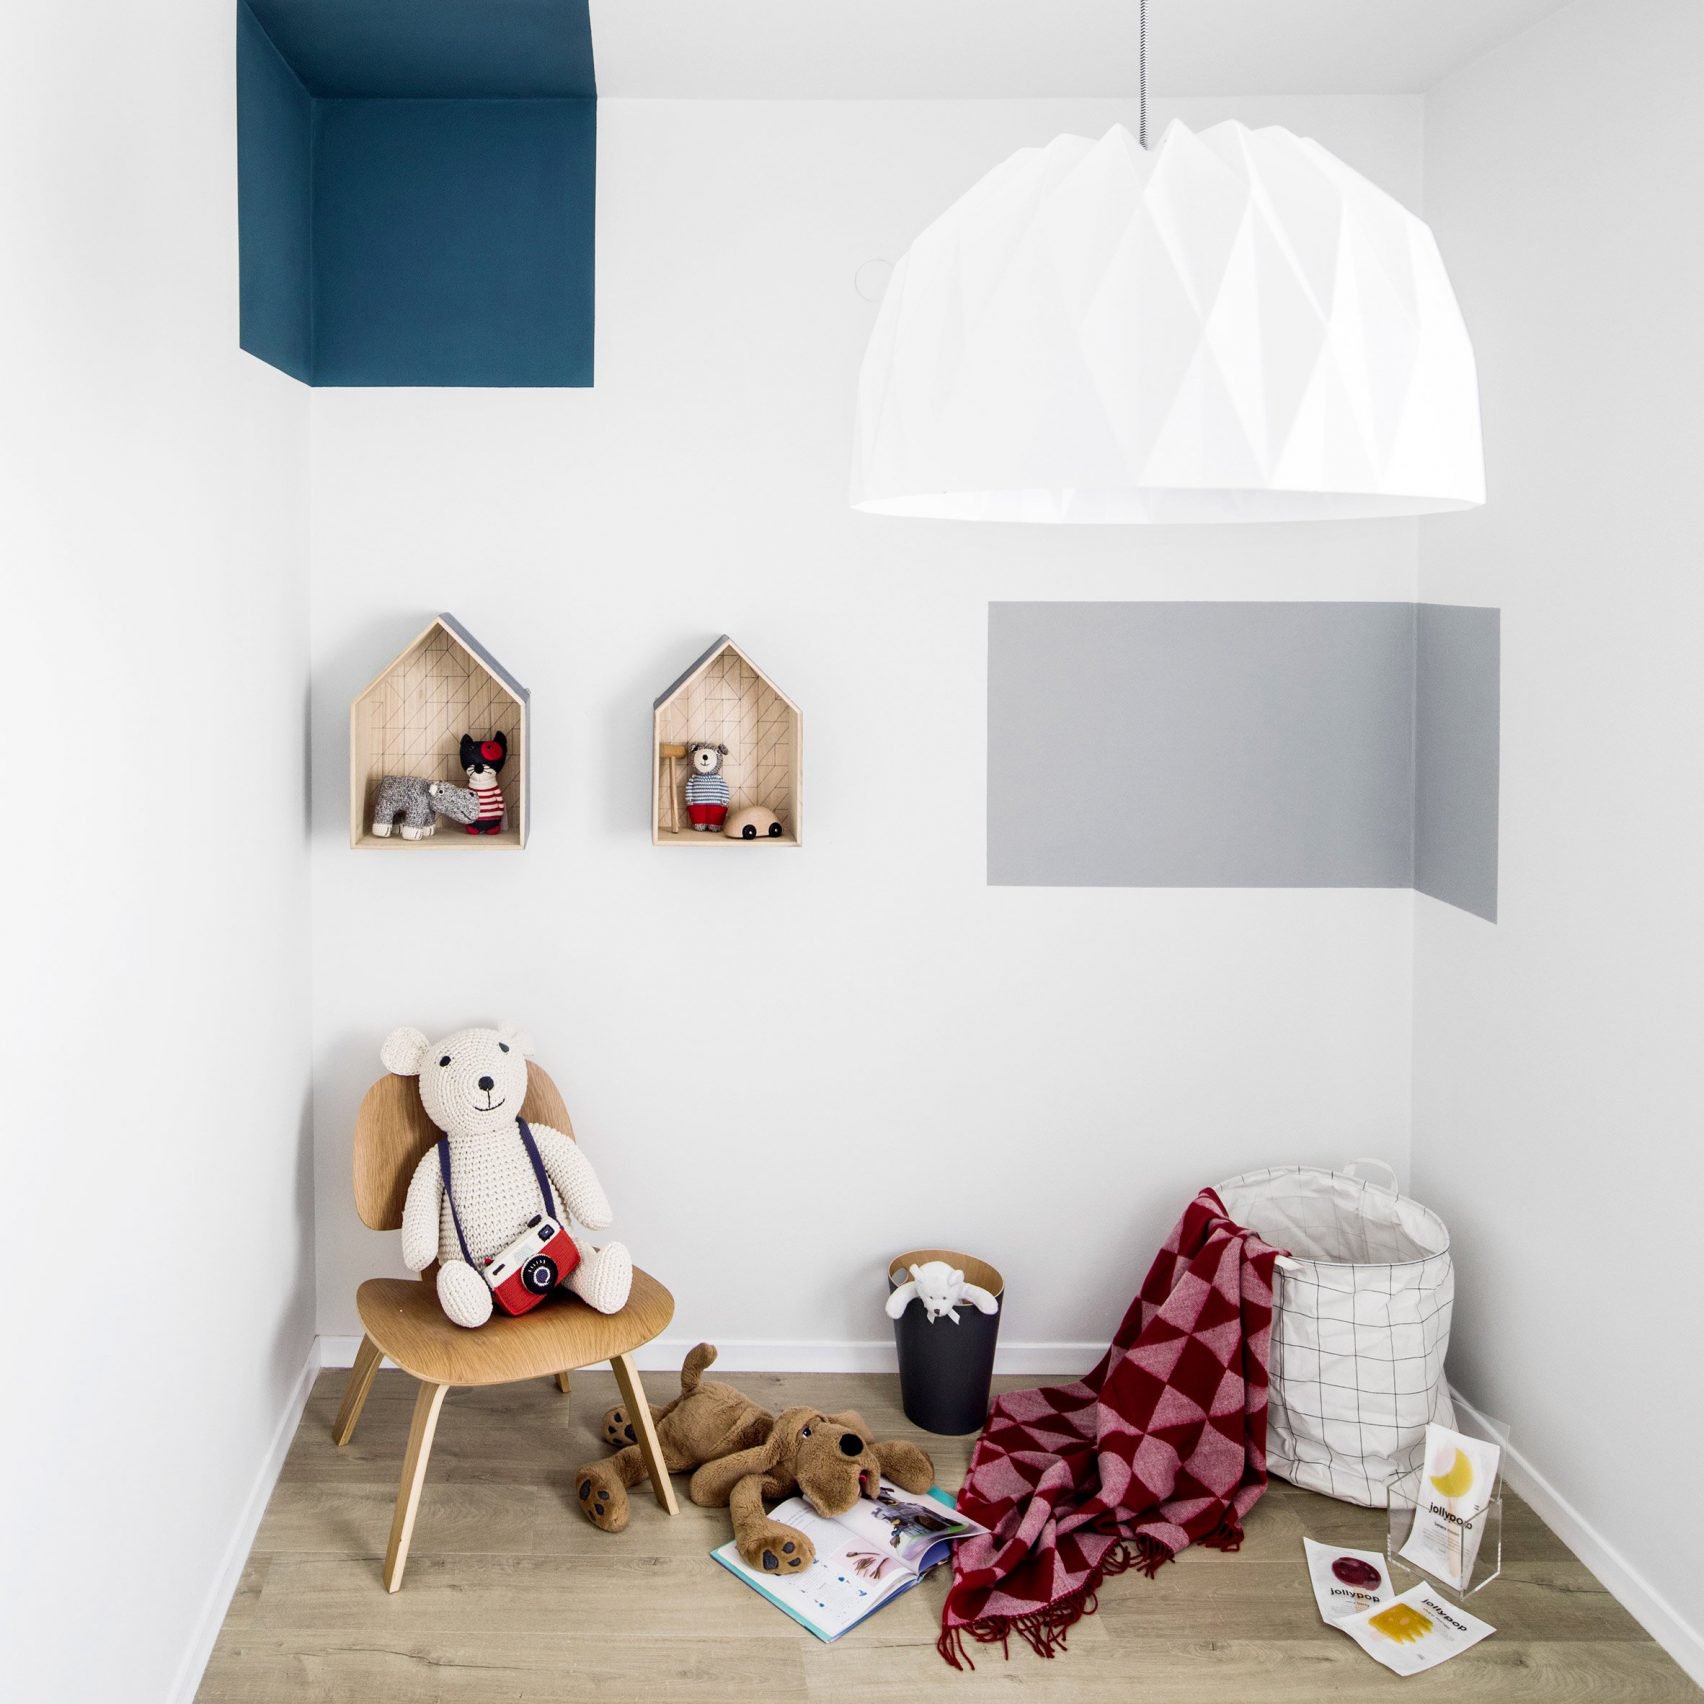 You'll Find This Children Room Design The Most Fun! 3 home design ideas, home interior decor, children room design, Russian summer house, indoor play area, industrial style lamp